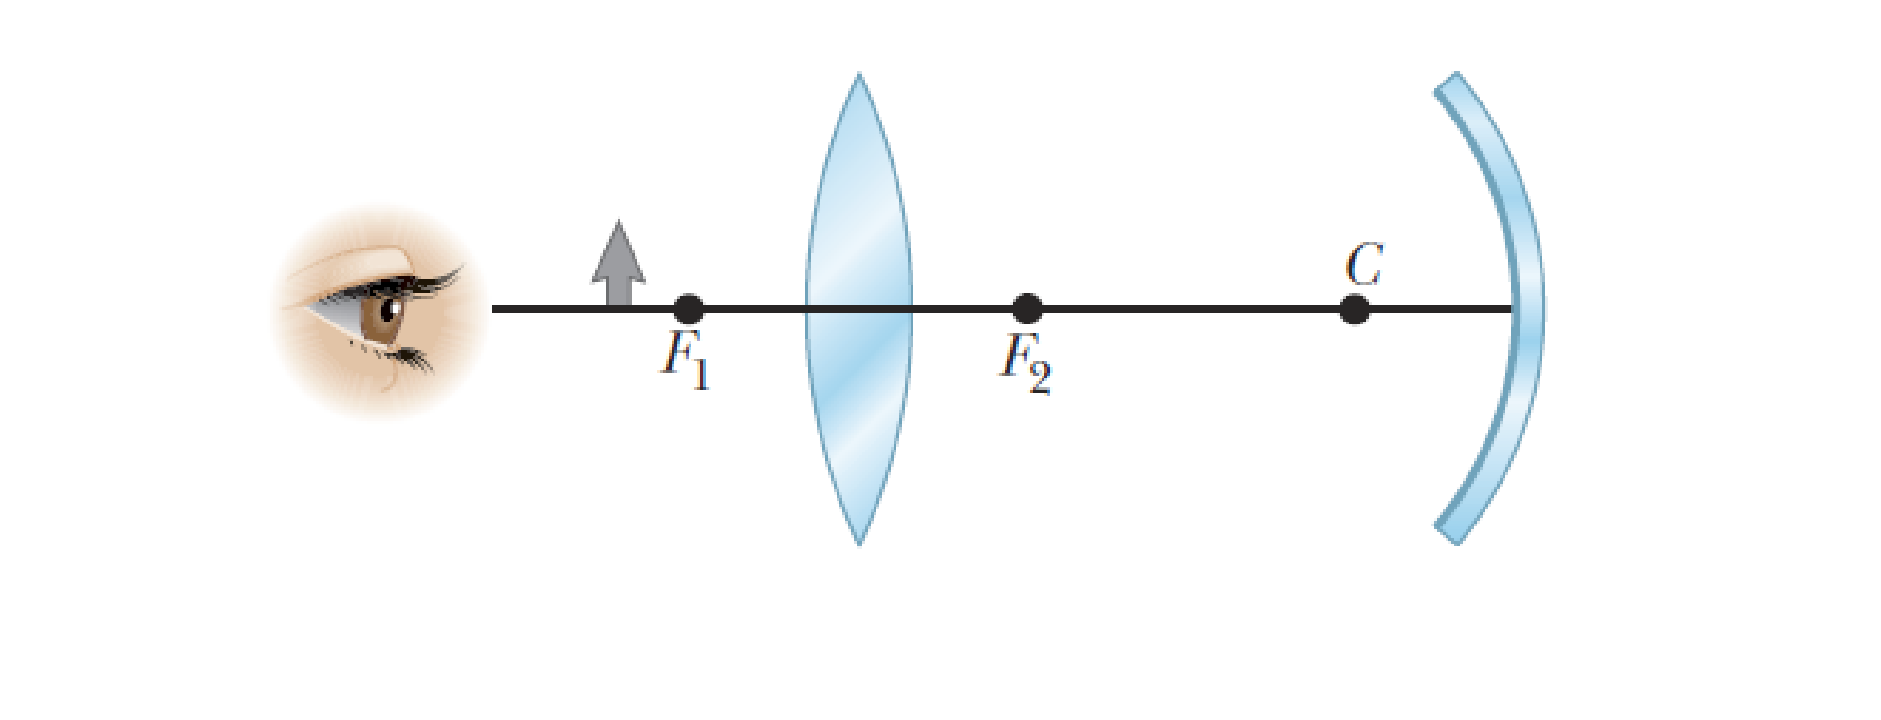 Chapter 26, Problem 72P, Figure P26.72 shows a thin converging lens for which the radii of curvature of its surfaces have 